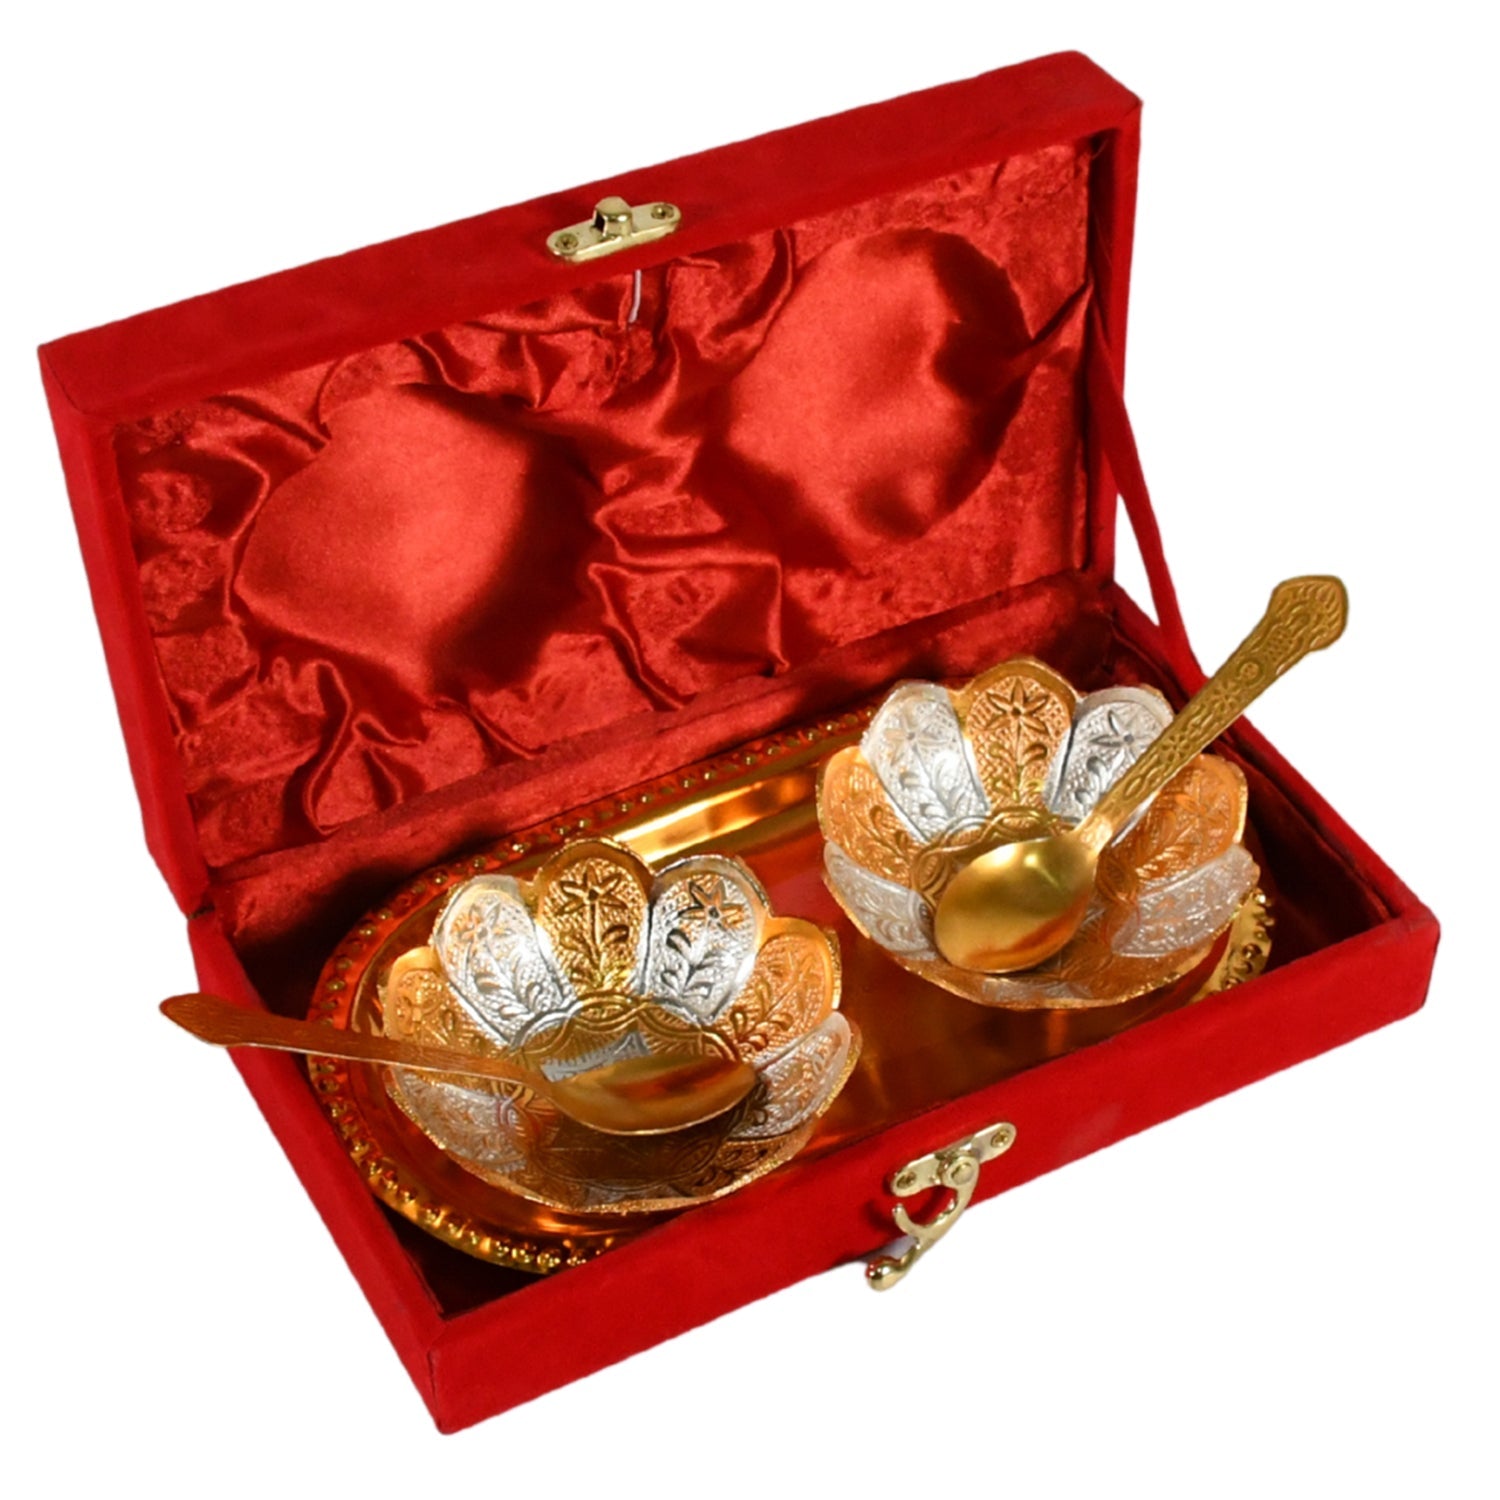 5636 5in1 Gold Silver Plated 2 Bowl 2 Spoon Tray Set Brass with Red Velvet Gift Box Serving Dry Fruits Desserts Gift